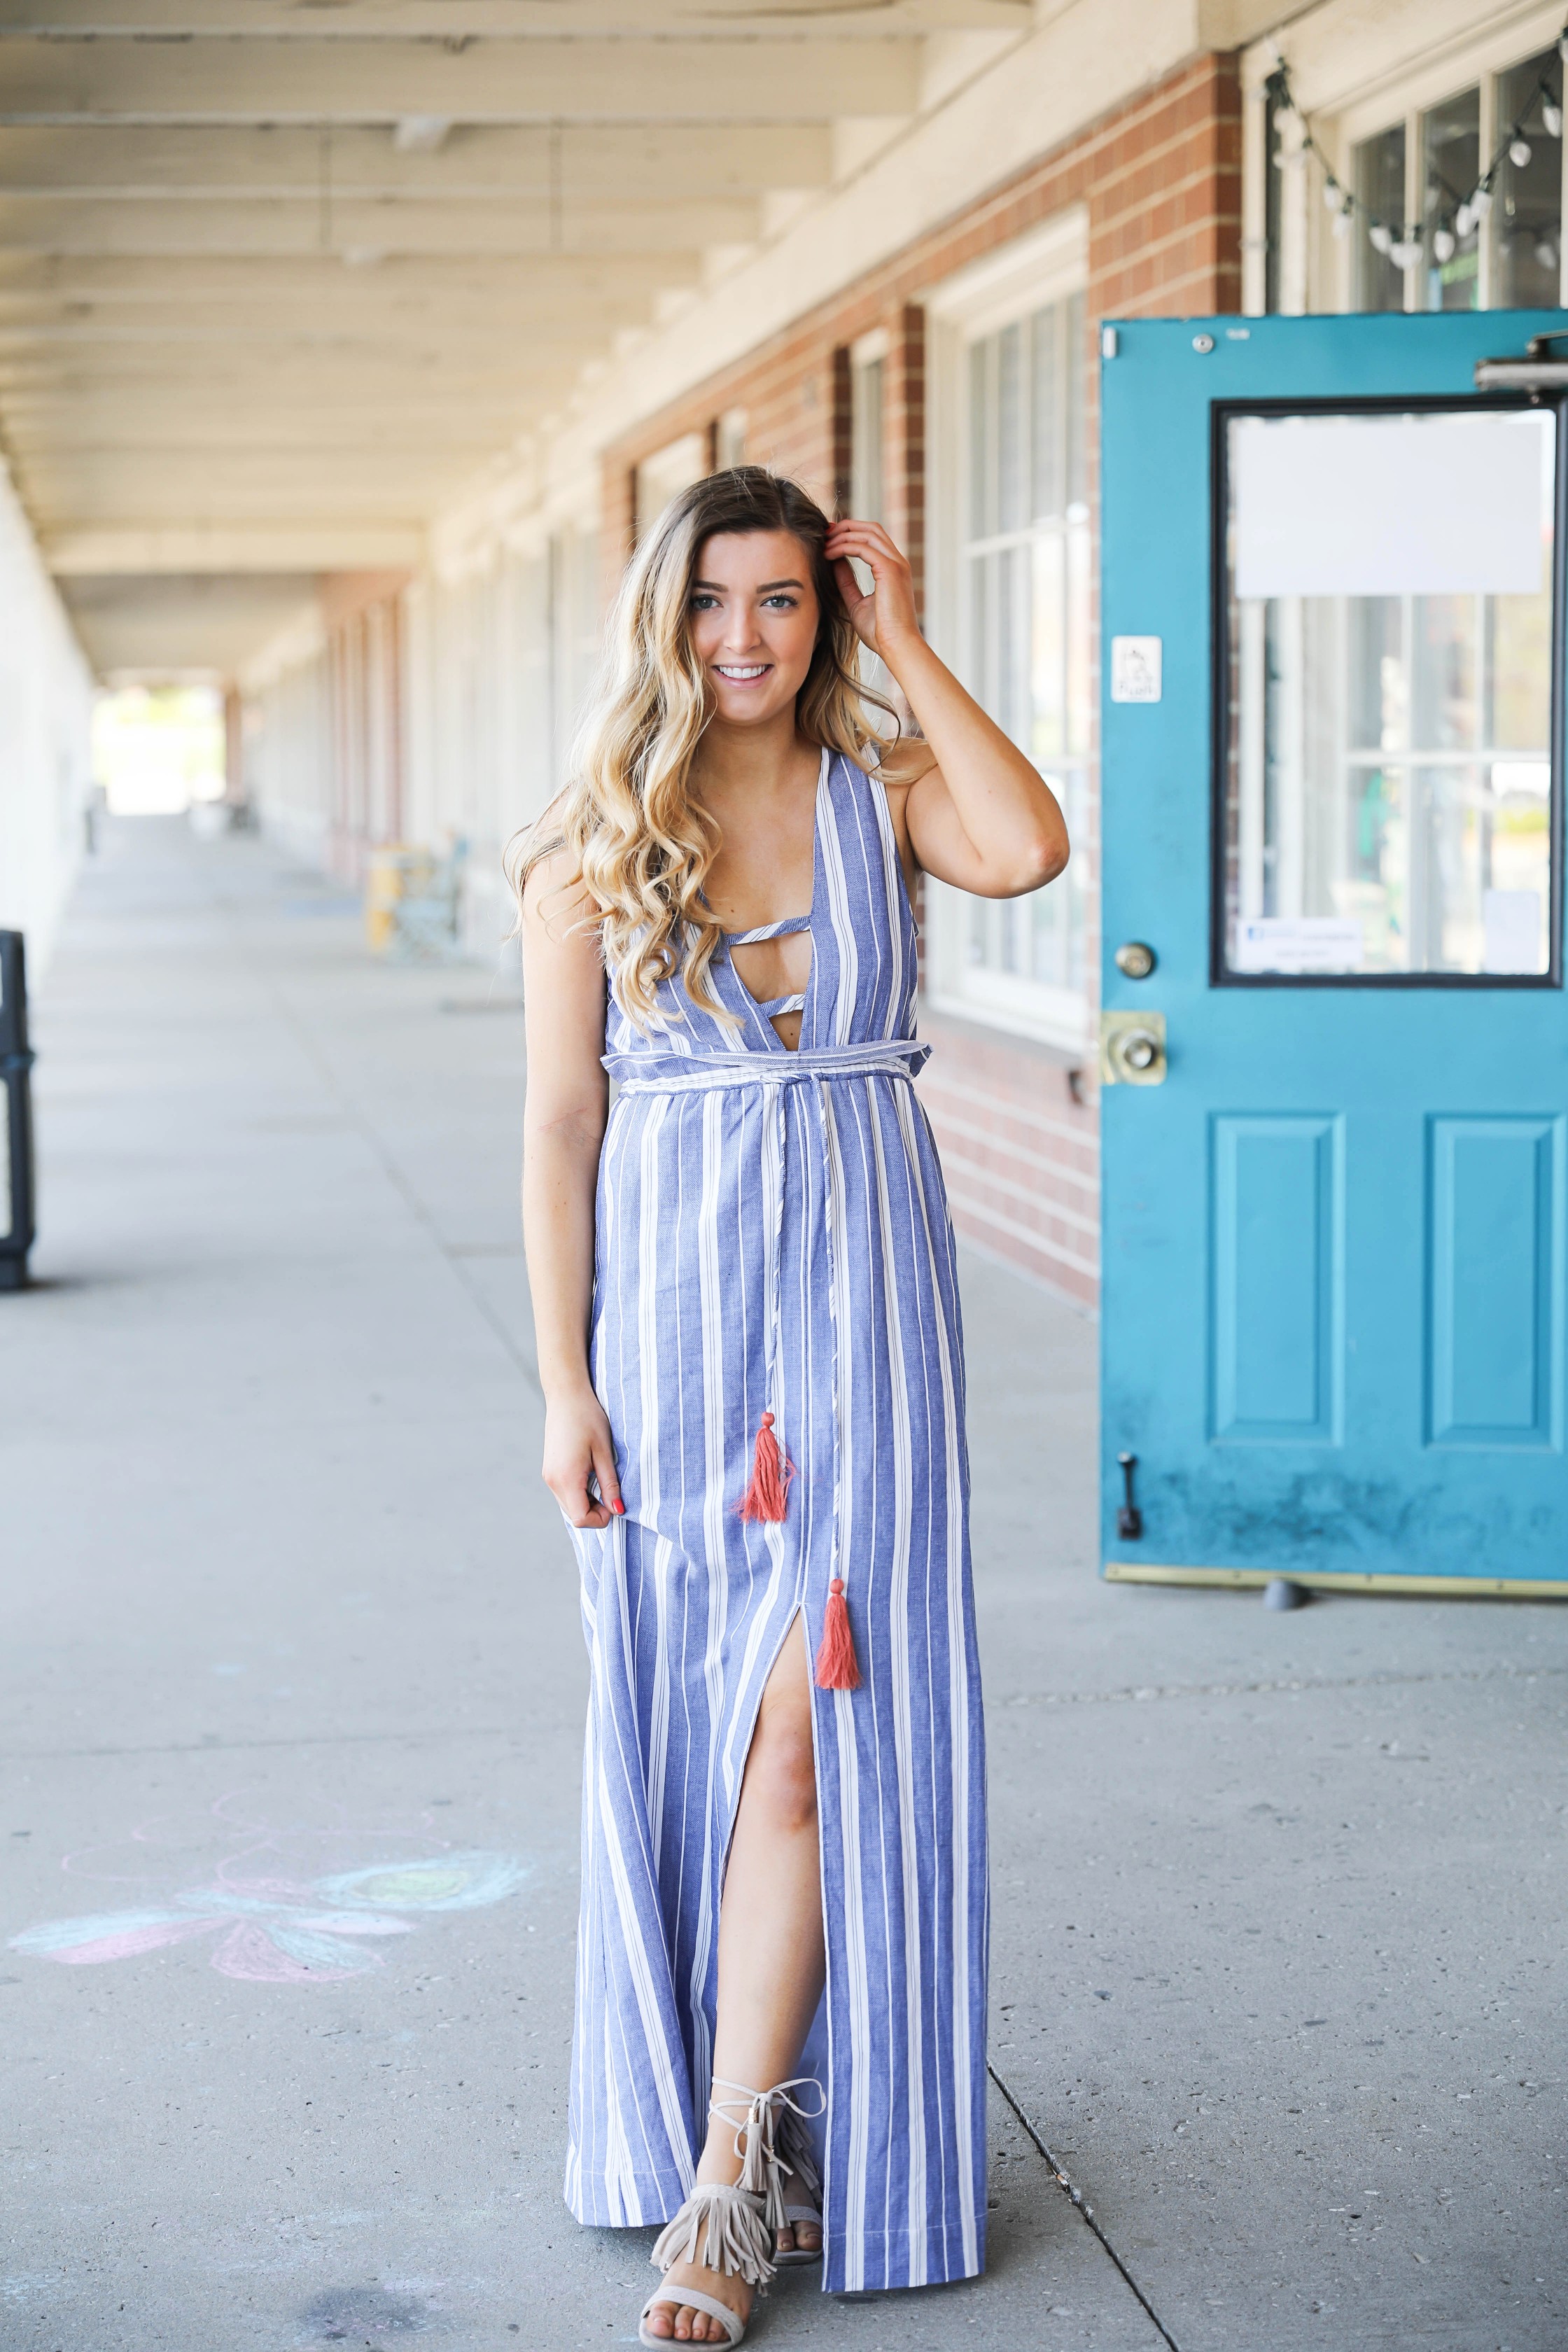 How cute is this Nautical Striped Tassel Dress? I have been loving dresses for spring and summer and this one is one of my favorites! Perfect for boating or days by the beach. By Lauren Lindmark on daily dose of charm dailydoseofcharm.com